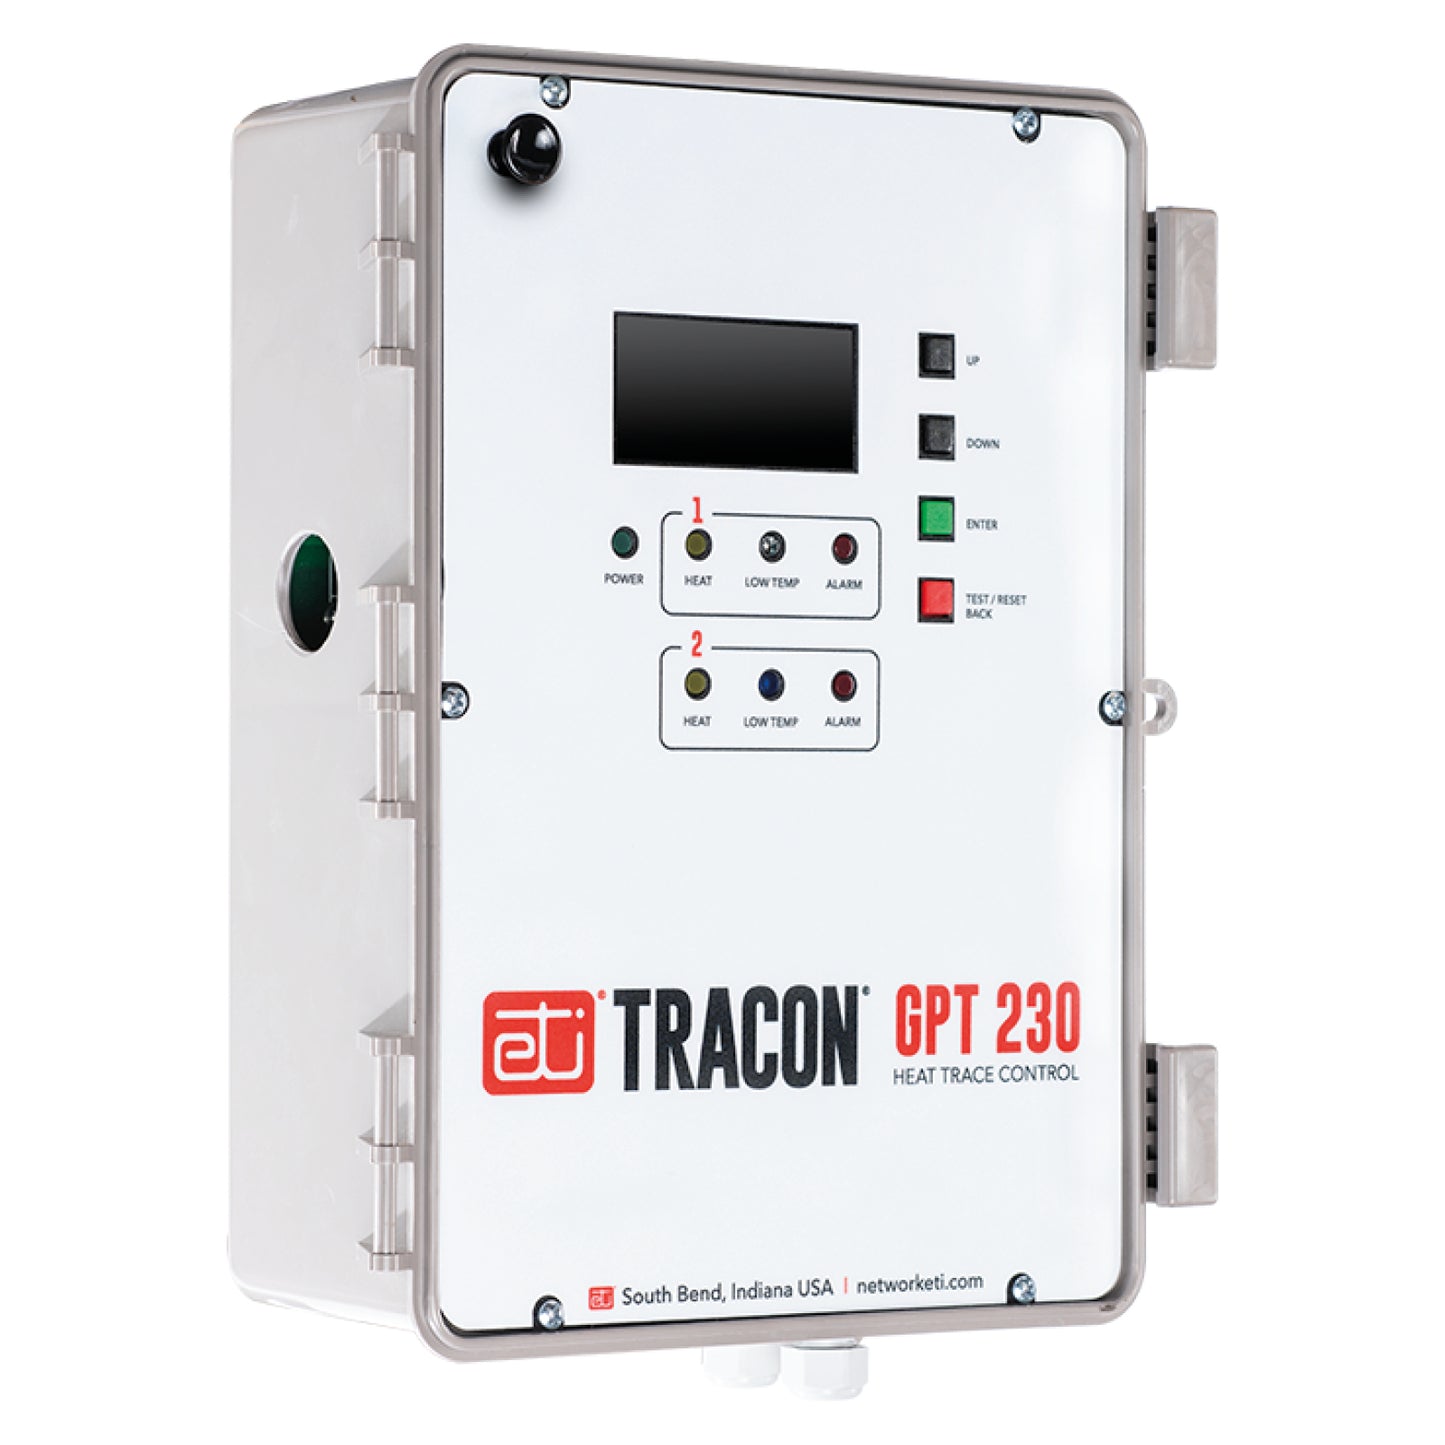 Tracon GPT-230 (25170) Dual Channel Point Microprocessor Based Temperature Controller Thermostat with GFEP